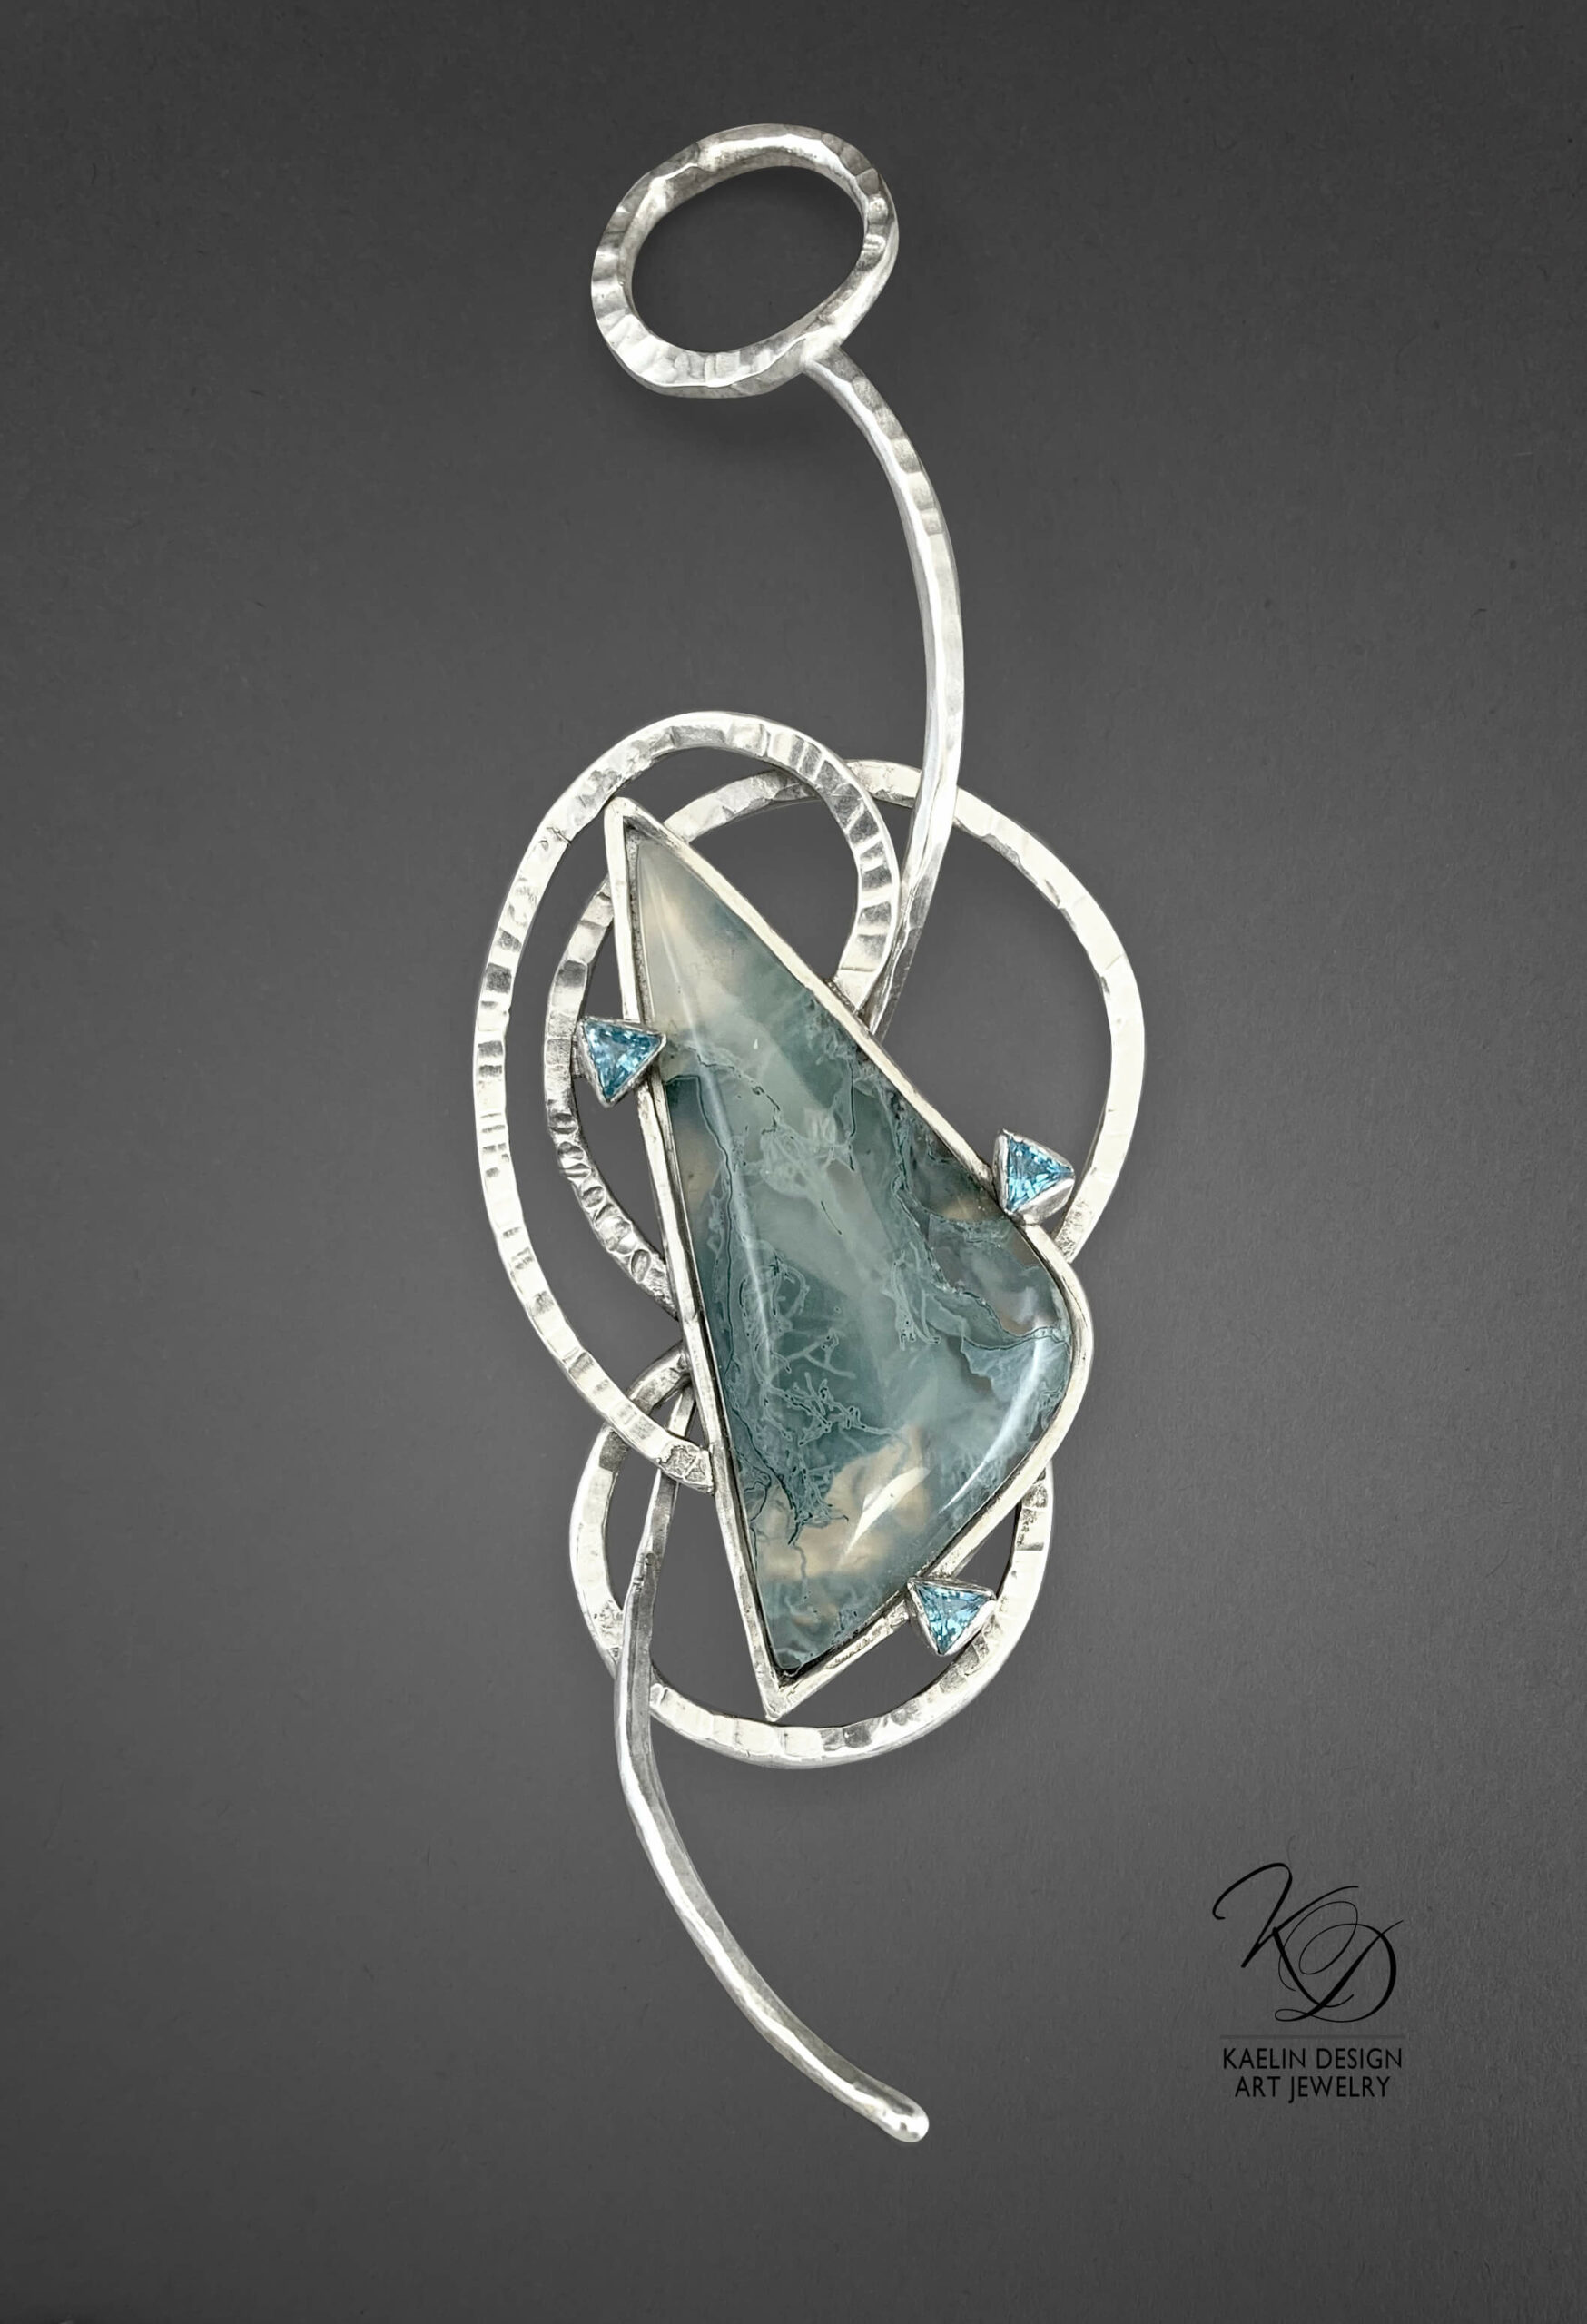 Whirlpool Depths Ochoco Agate and Topaz Convertible Art Jewelry Pendant and Brooch by Kaelin Design Fine Art Jewelry